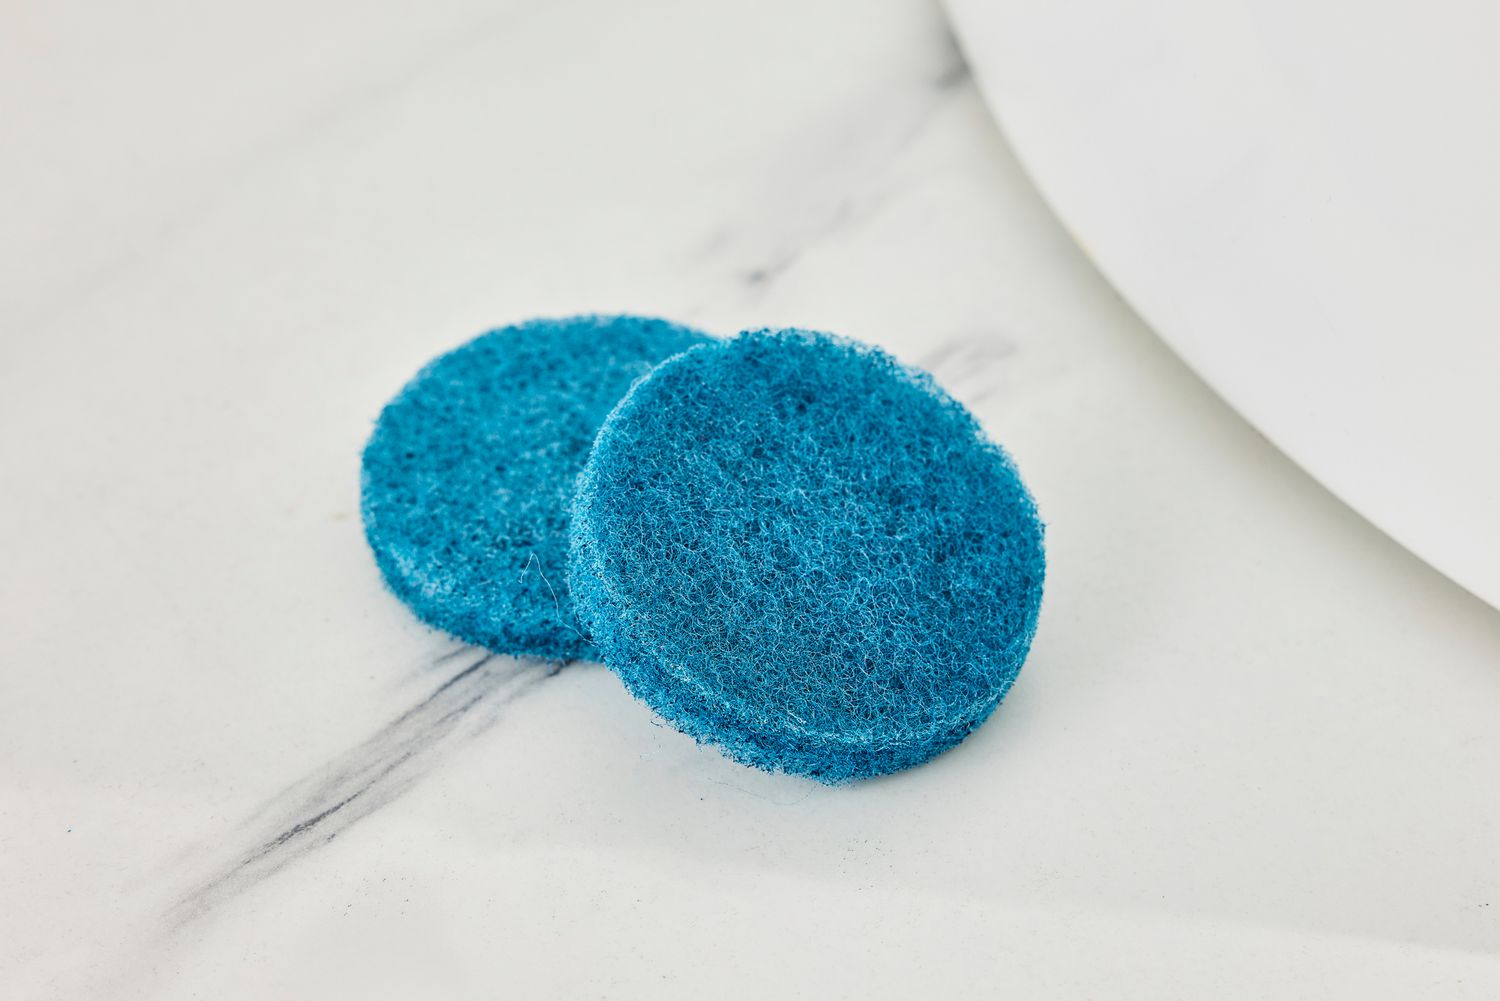 Two blue scrub pads lying on a marble counter